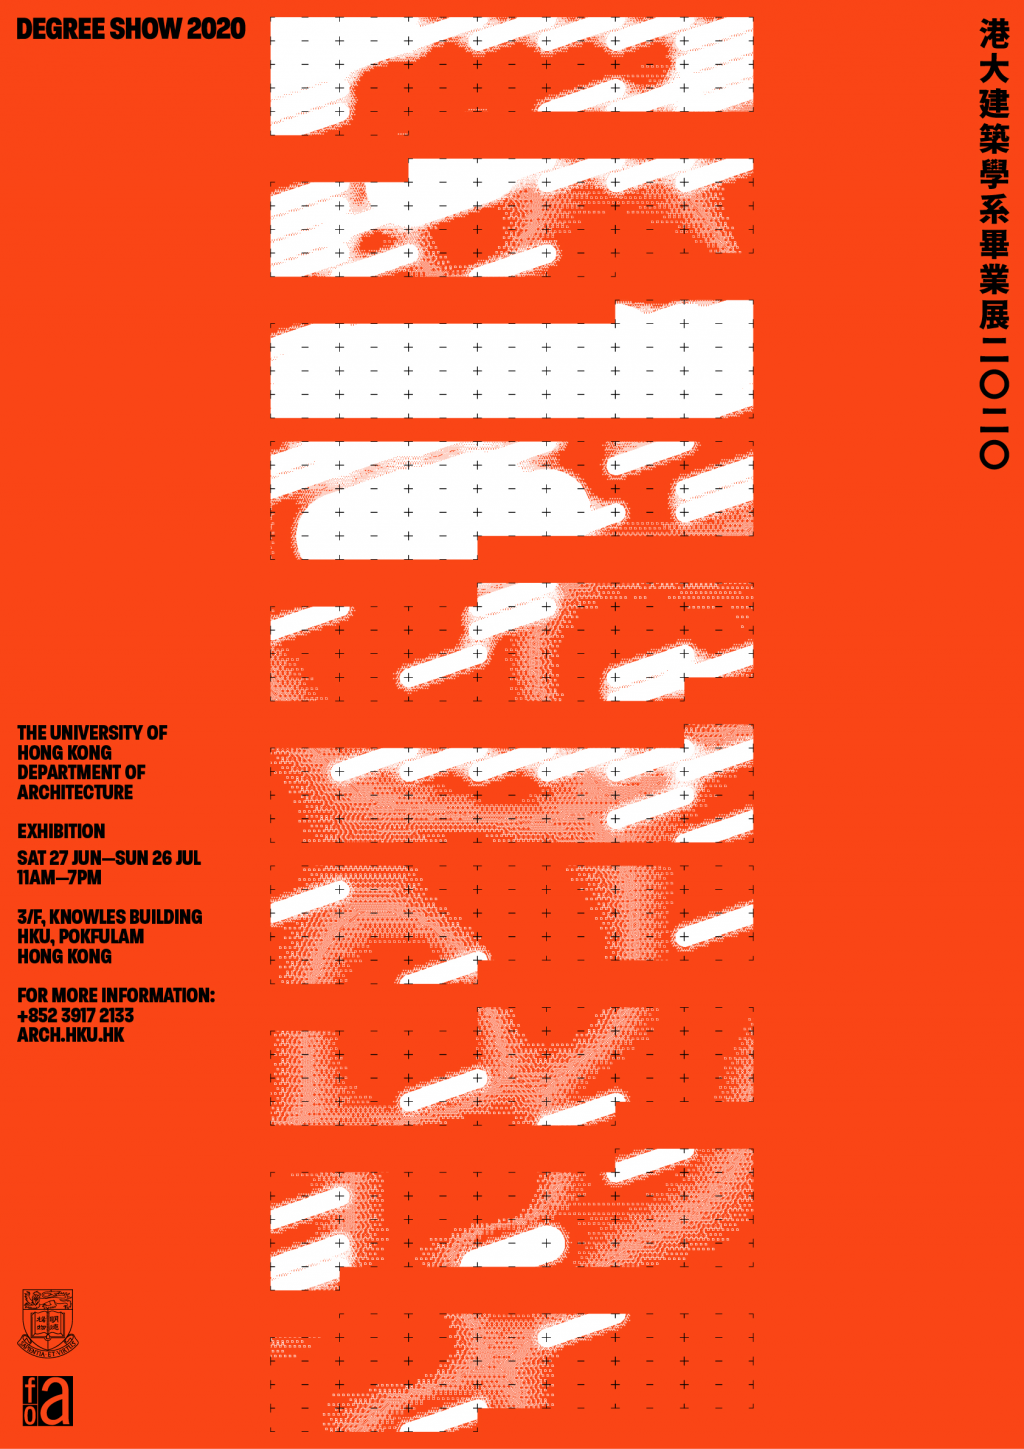 HKU Department of Architecture: Degree Show 2020